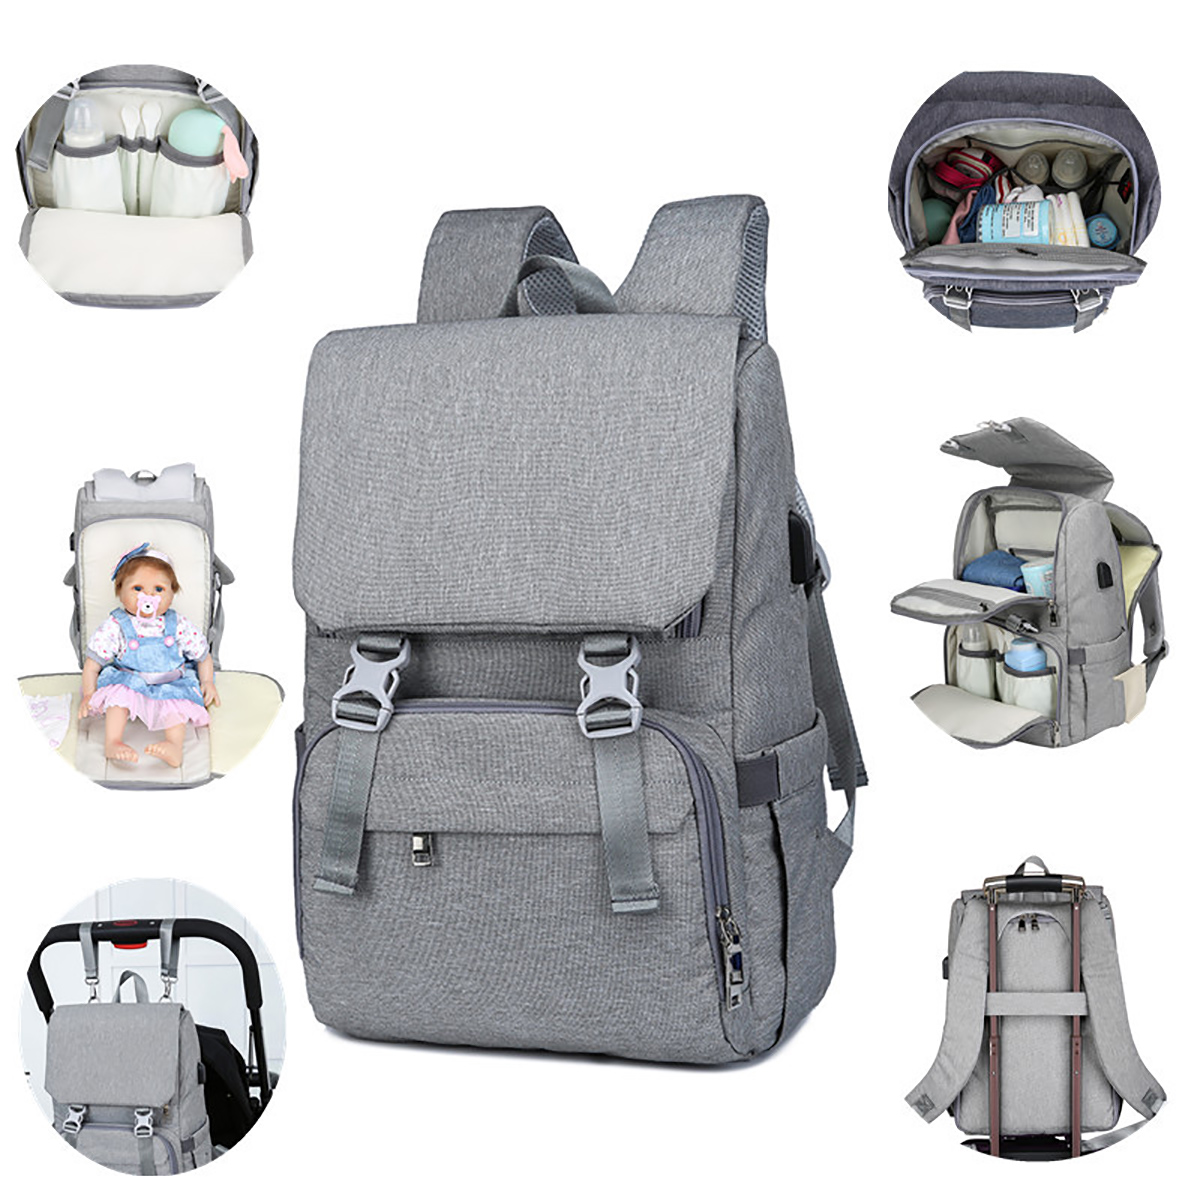 Outdoor-Mummy-Travel-Backpack-Large-Baby-Nappy-Changing-Bag--for-mom-Nursing-bag-1637117-3